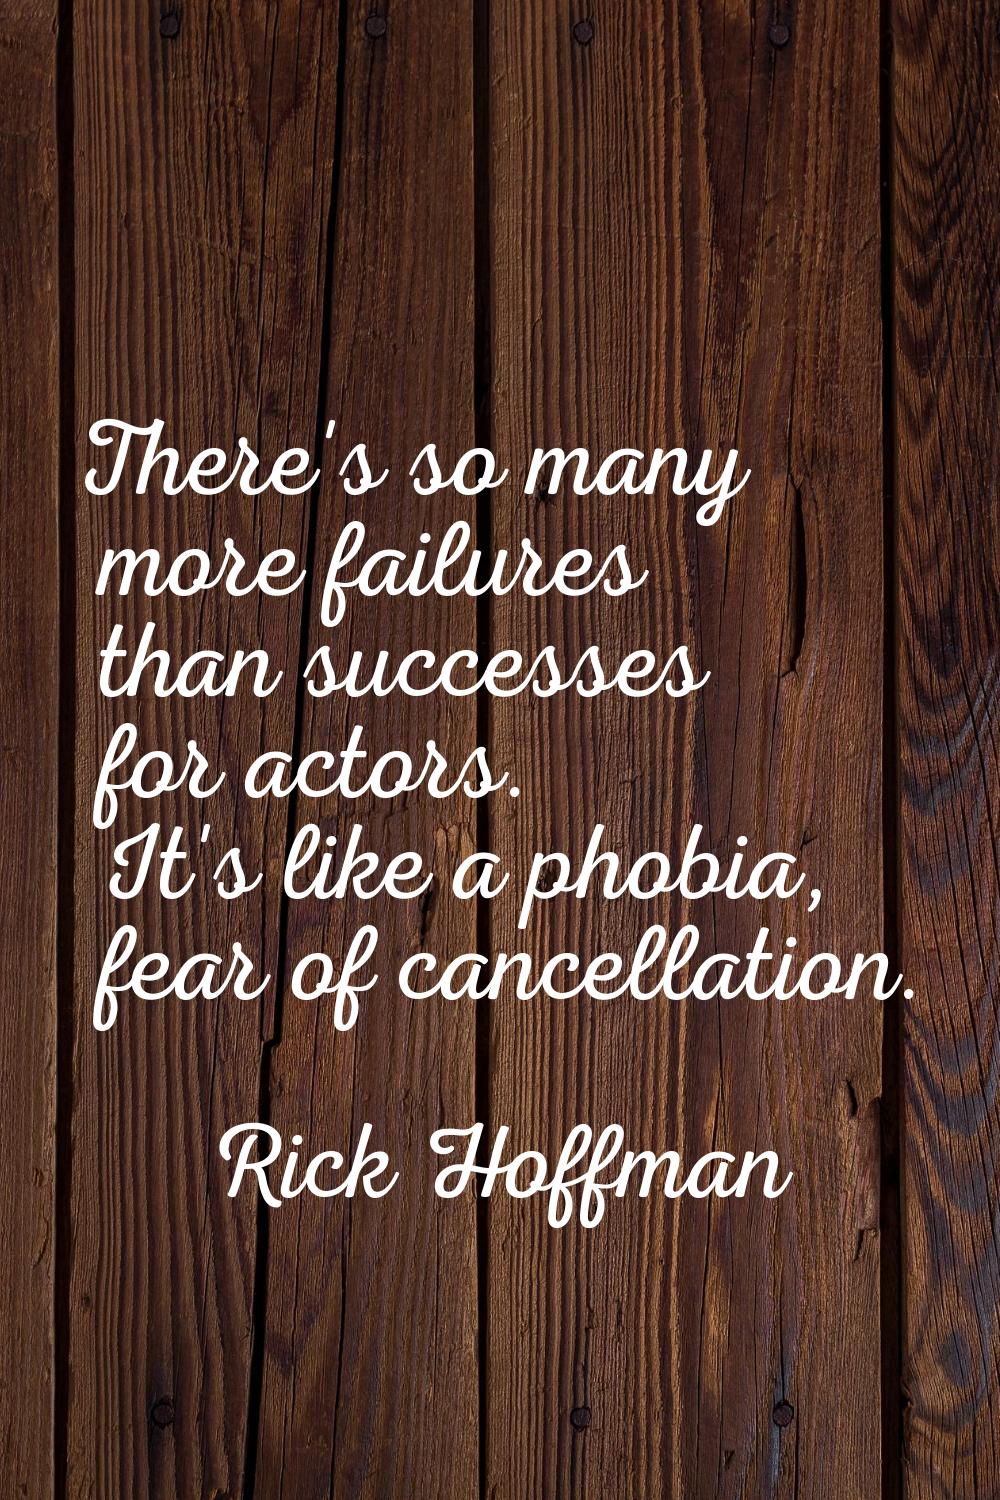 There's so many more failures than successes for actors. It's like a phobia, fear of cancellation.